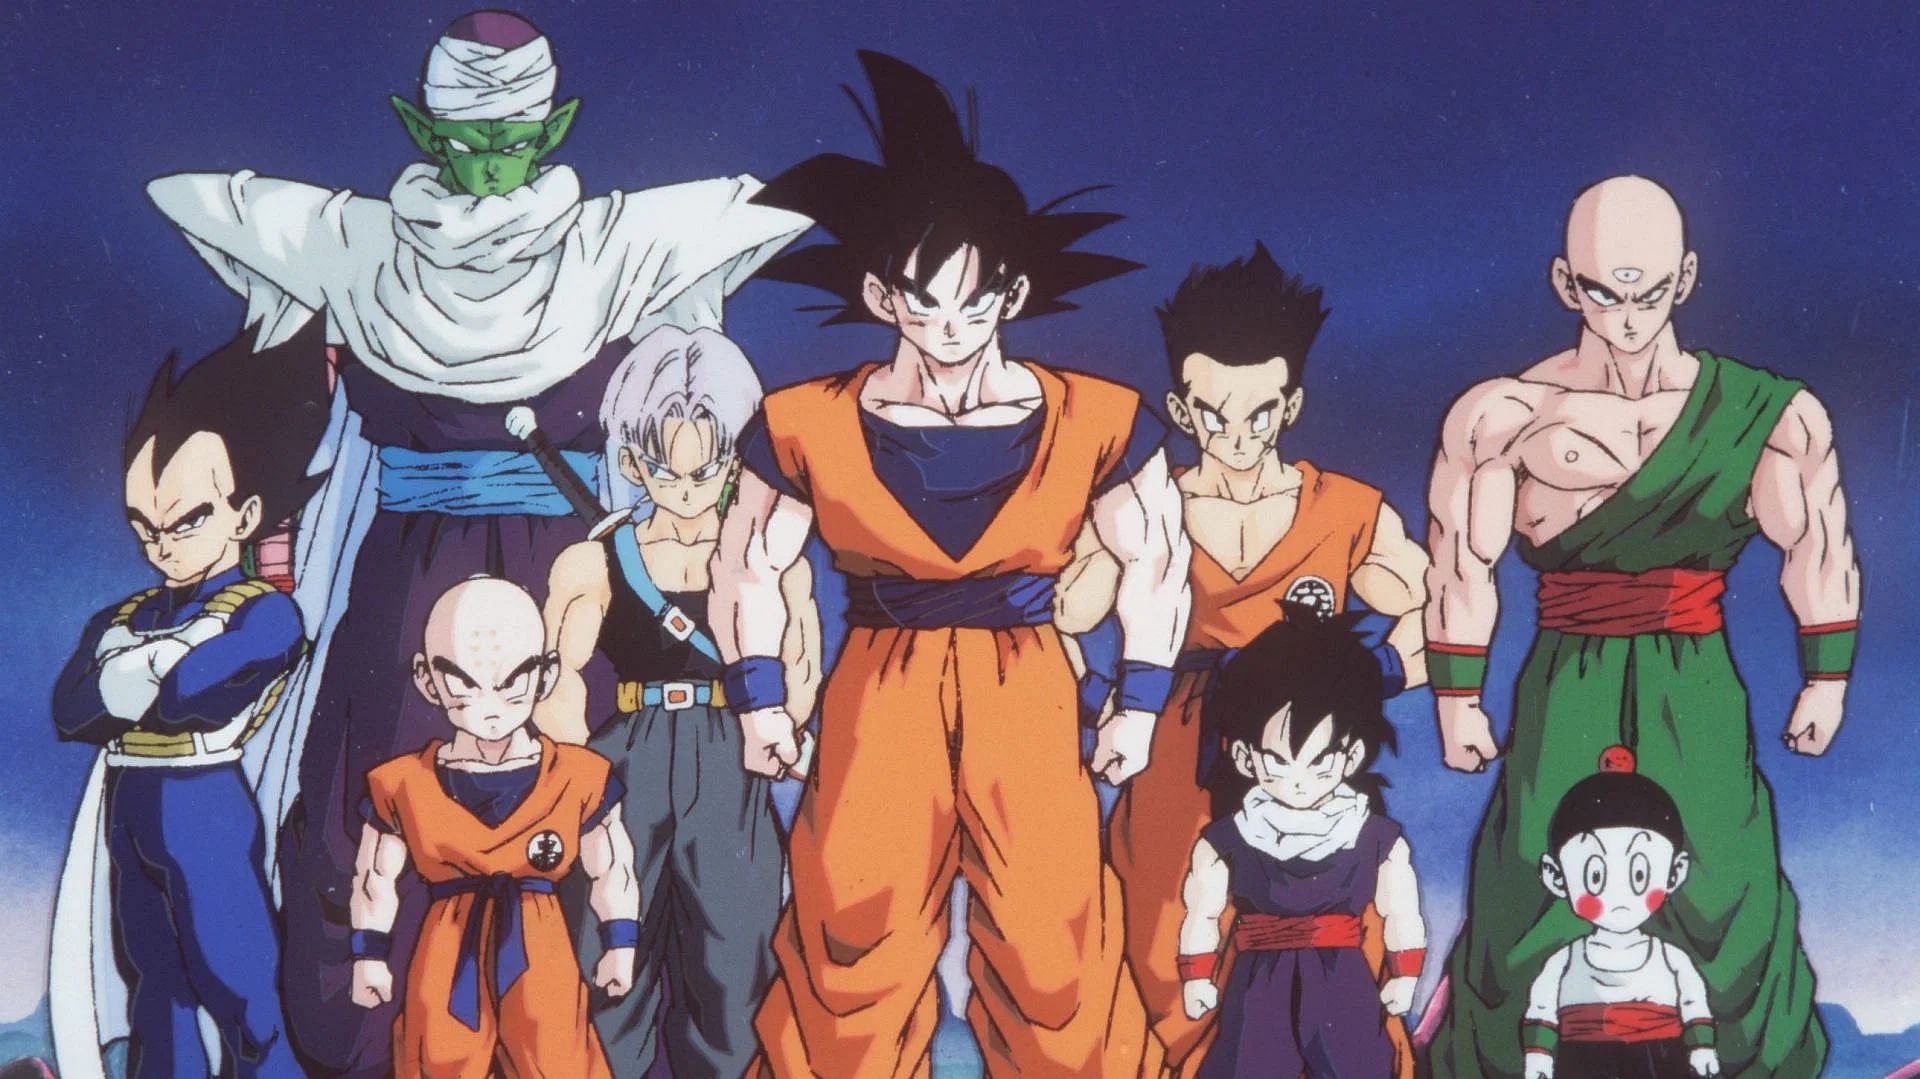 What Uub should have looked like in GT : r/dbz